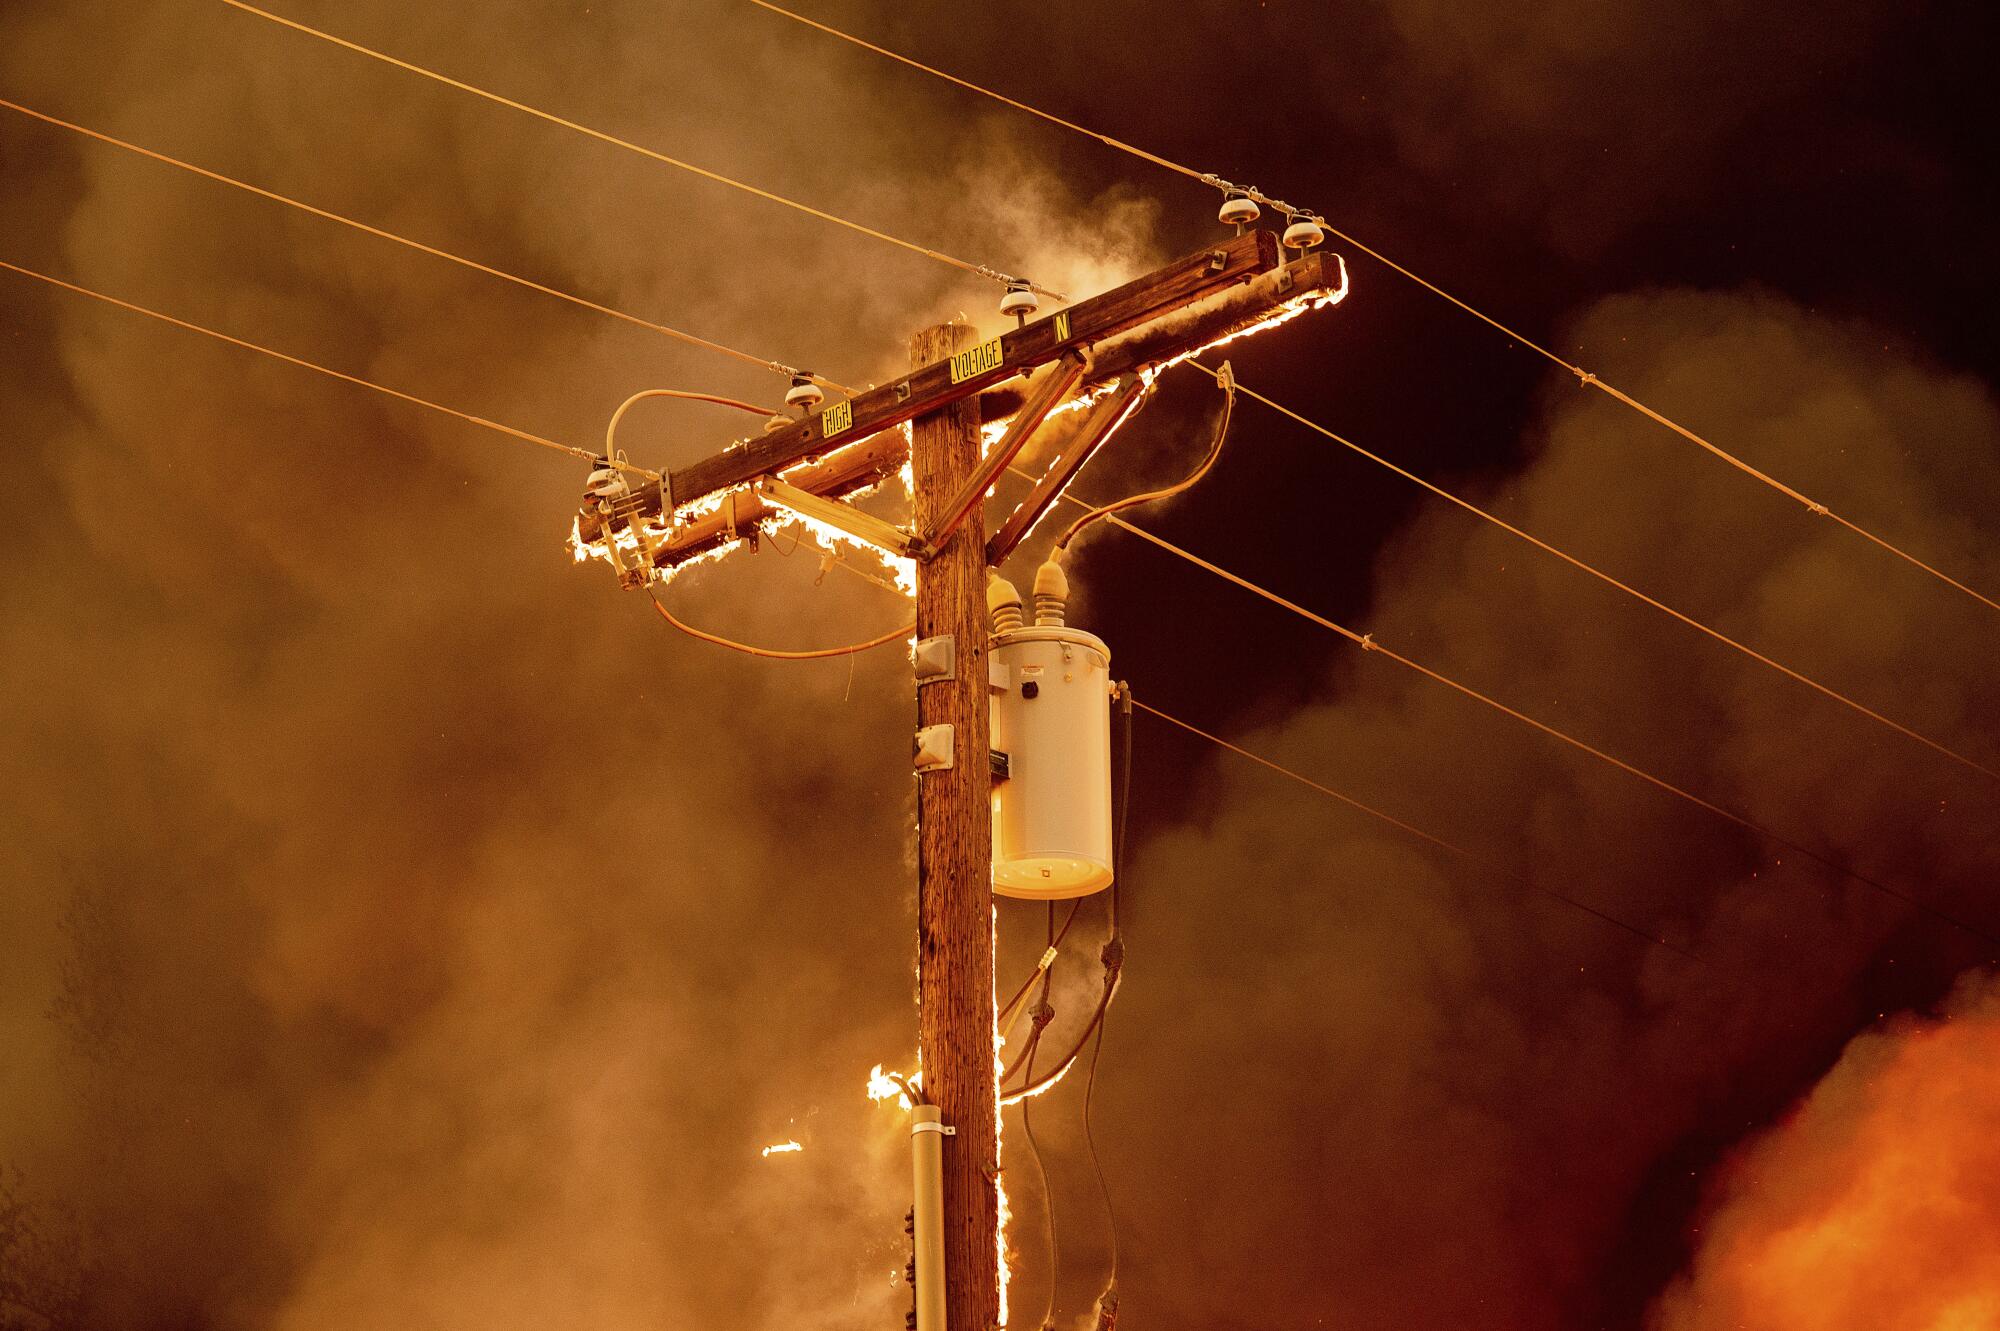 A power pole in flames